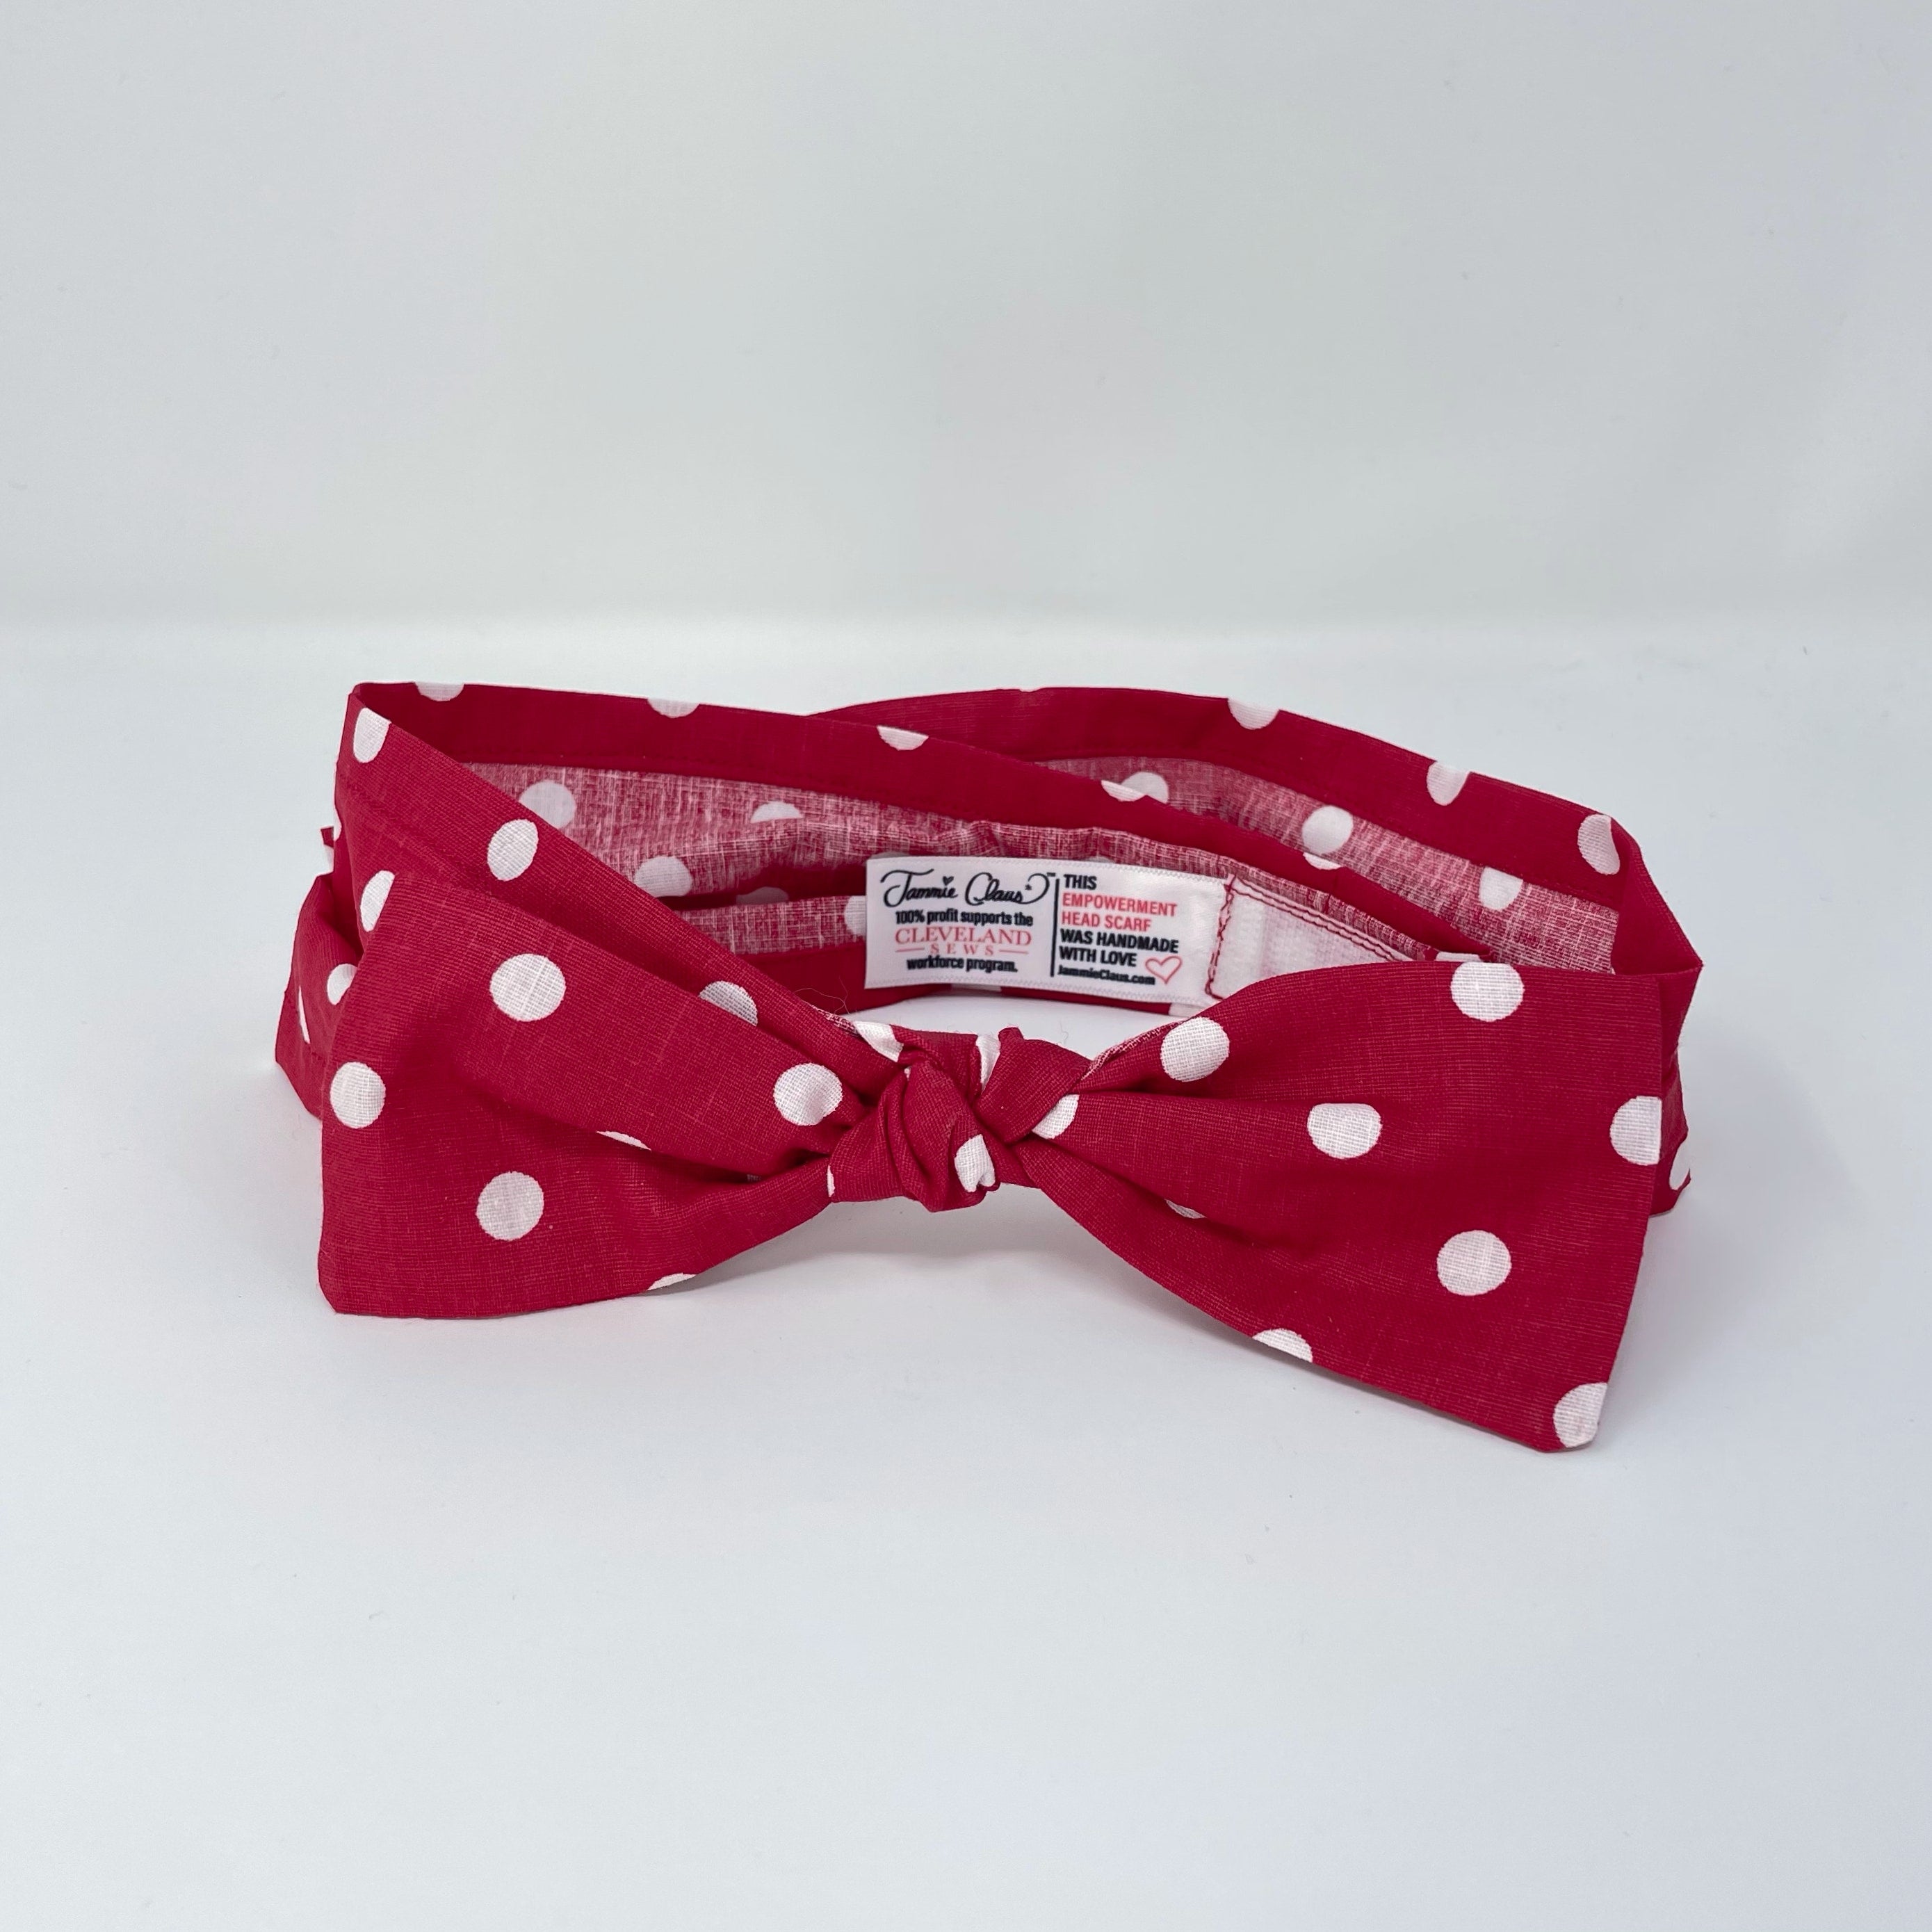 Jammie Claus Empowerment Head Scarf and Cleveland Sews Partnership tag